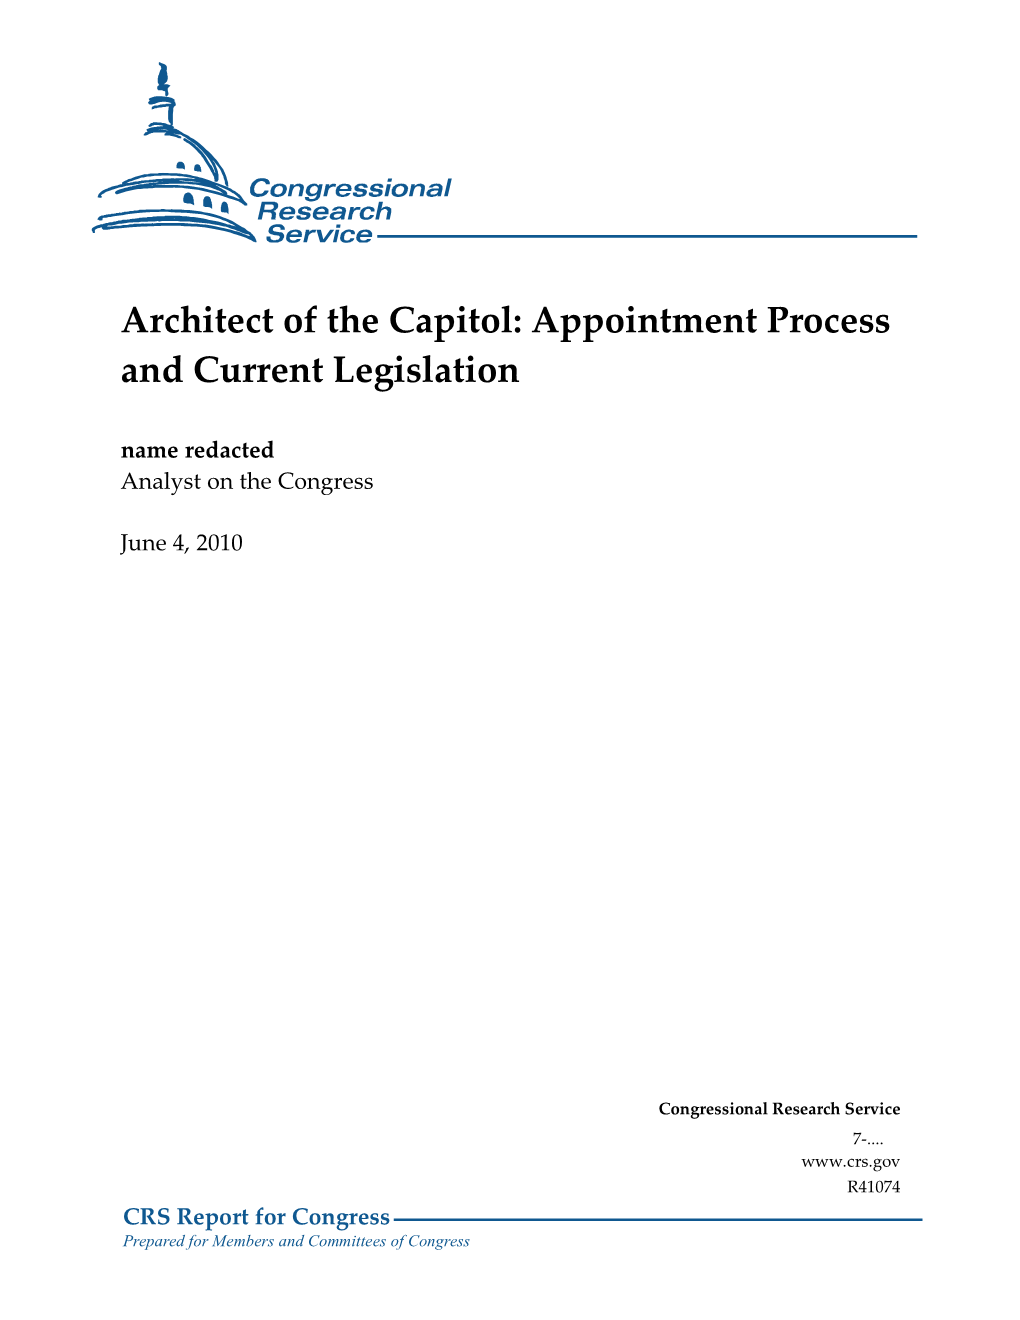 Appointment Process and Current Legislation Name Redacted Analyst on the Congress